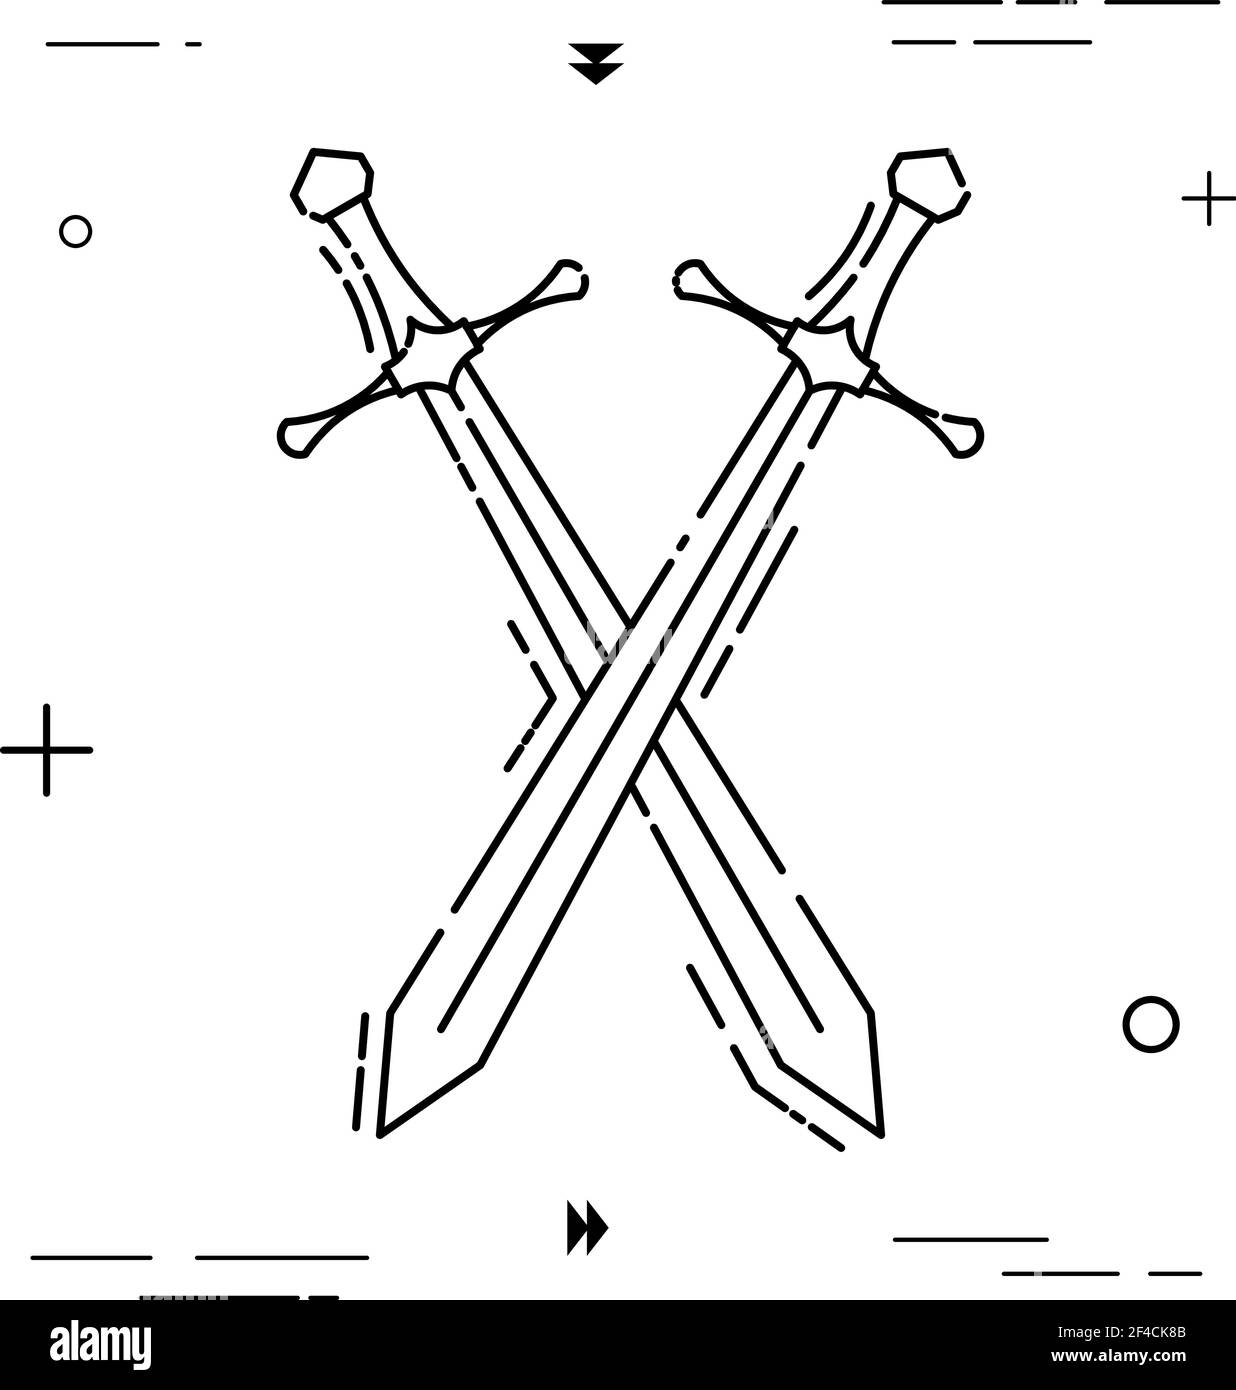 Mark with Two crossed swords and three dots.